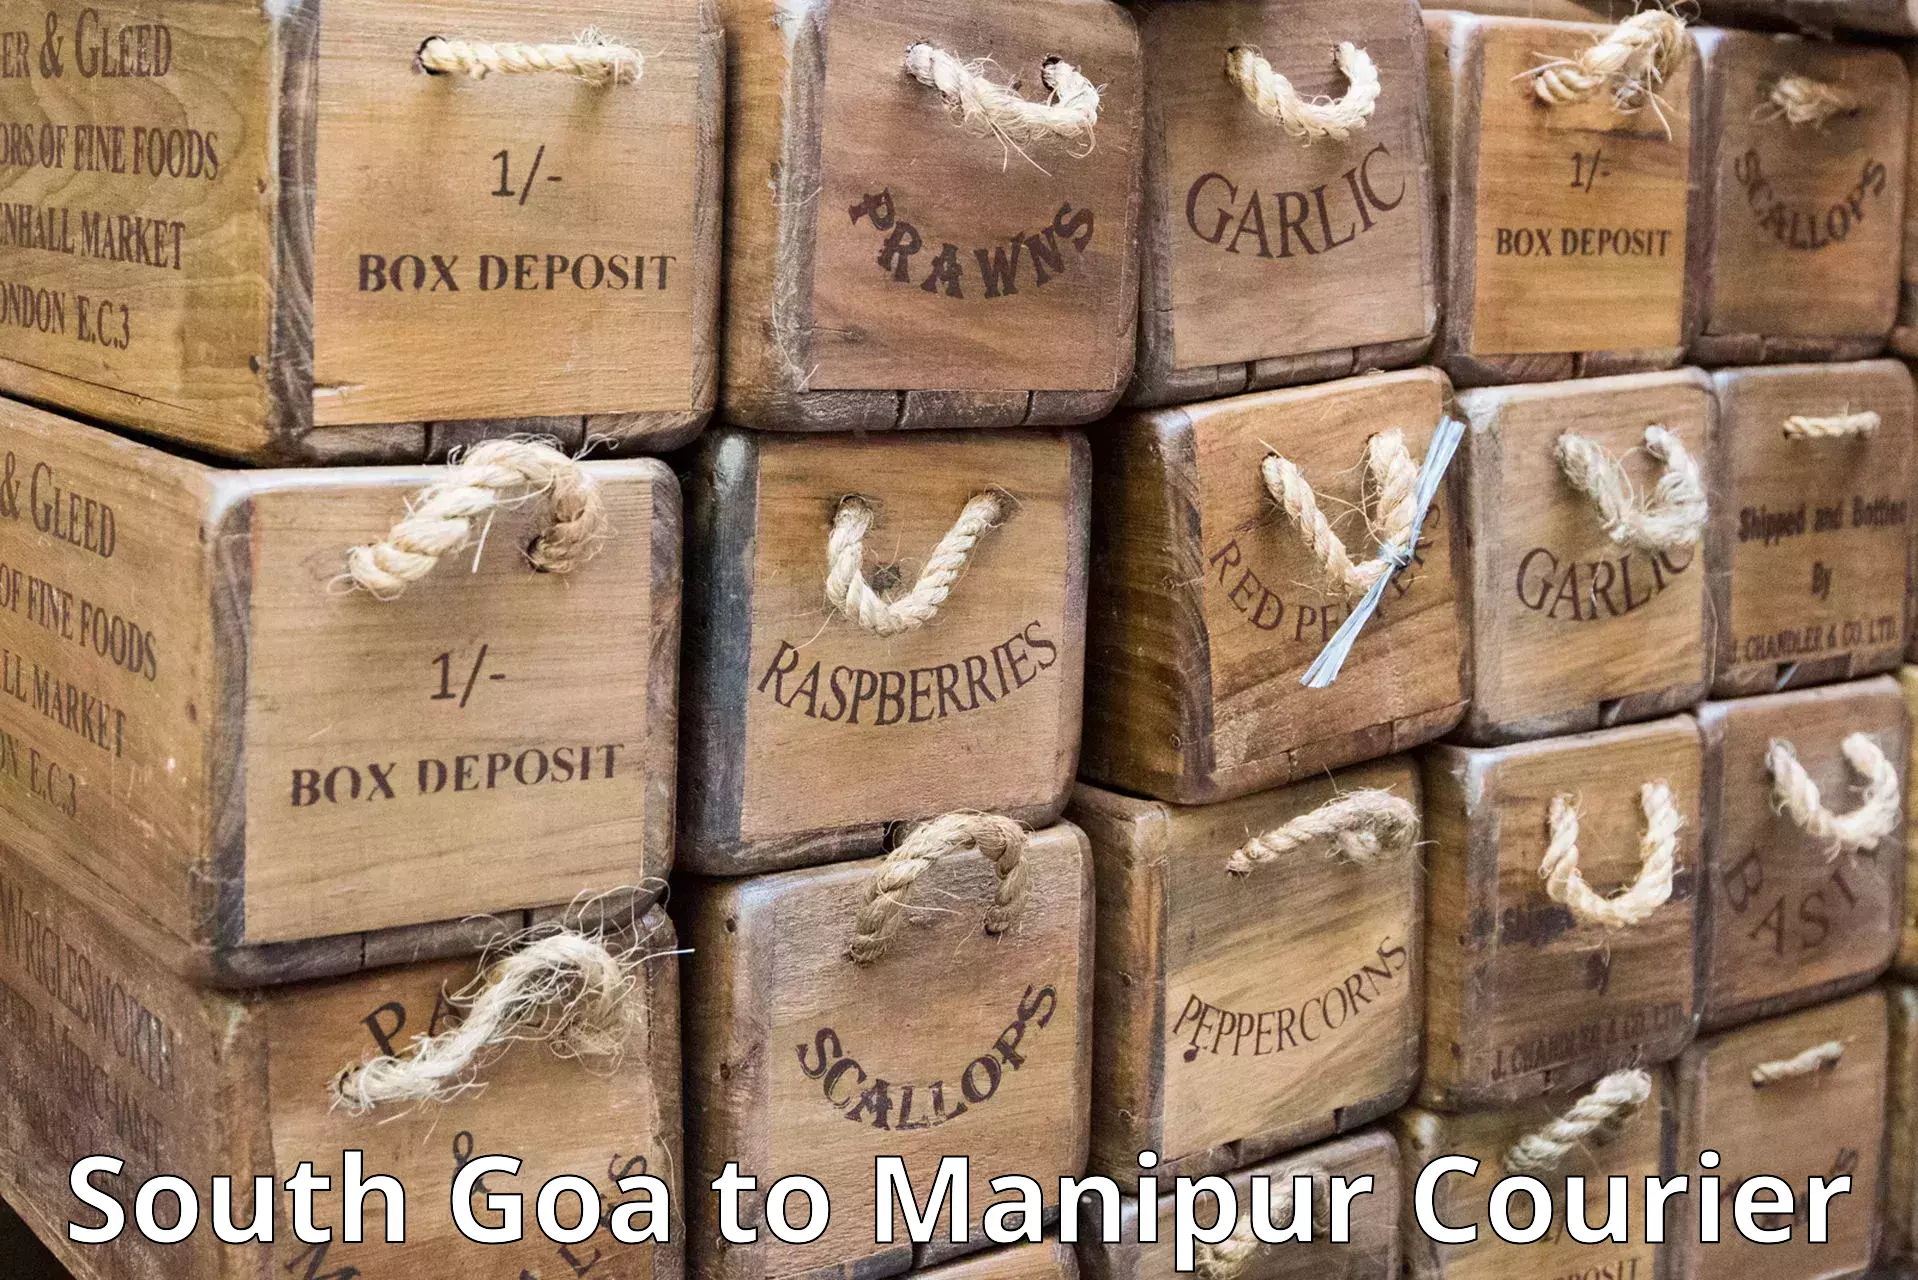 Courier rate comparison South Goa to Imphal